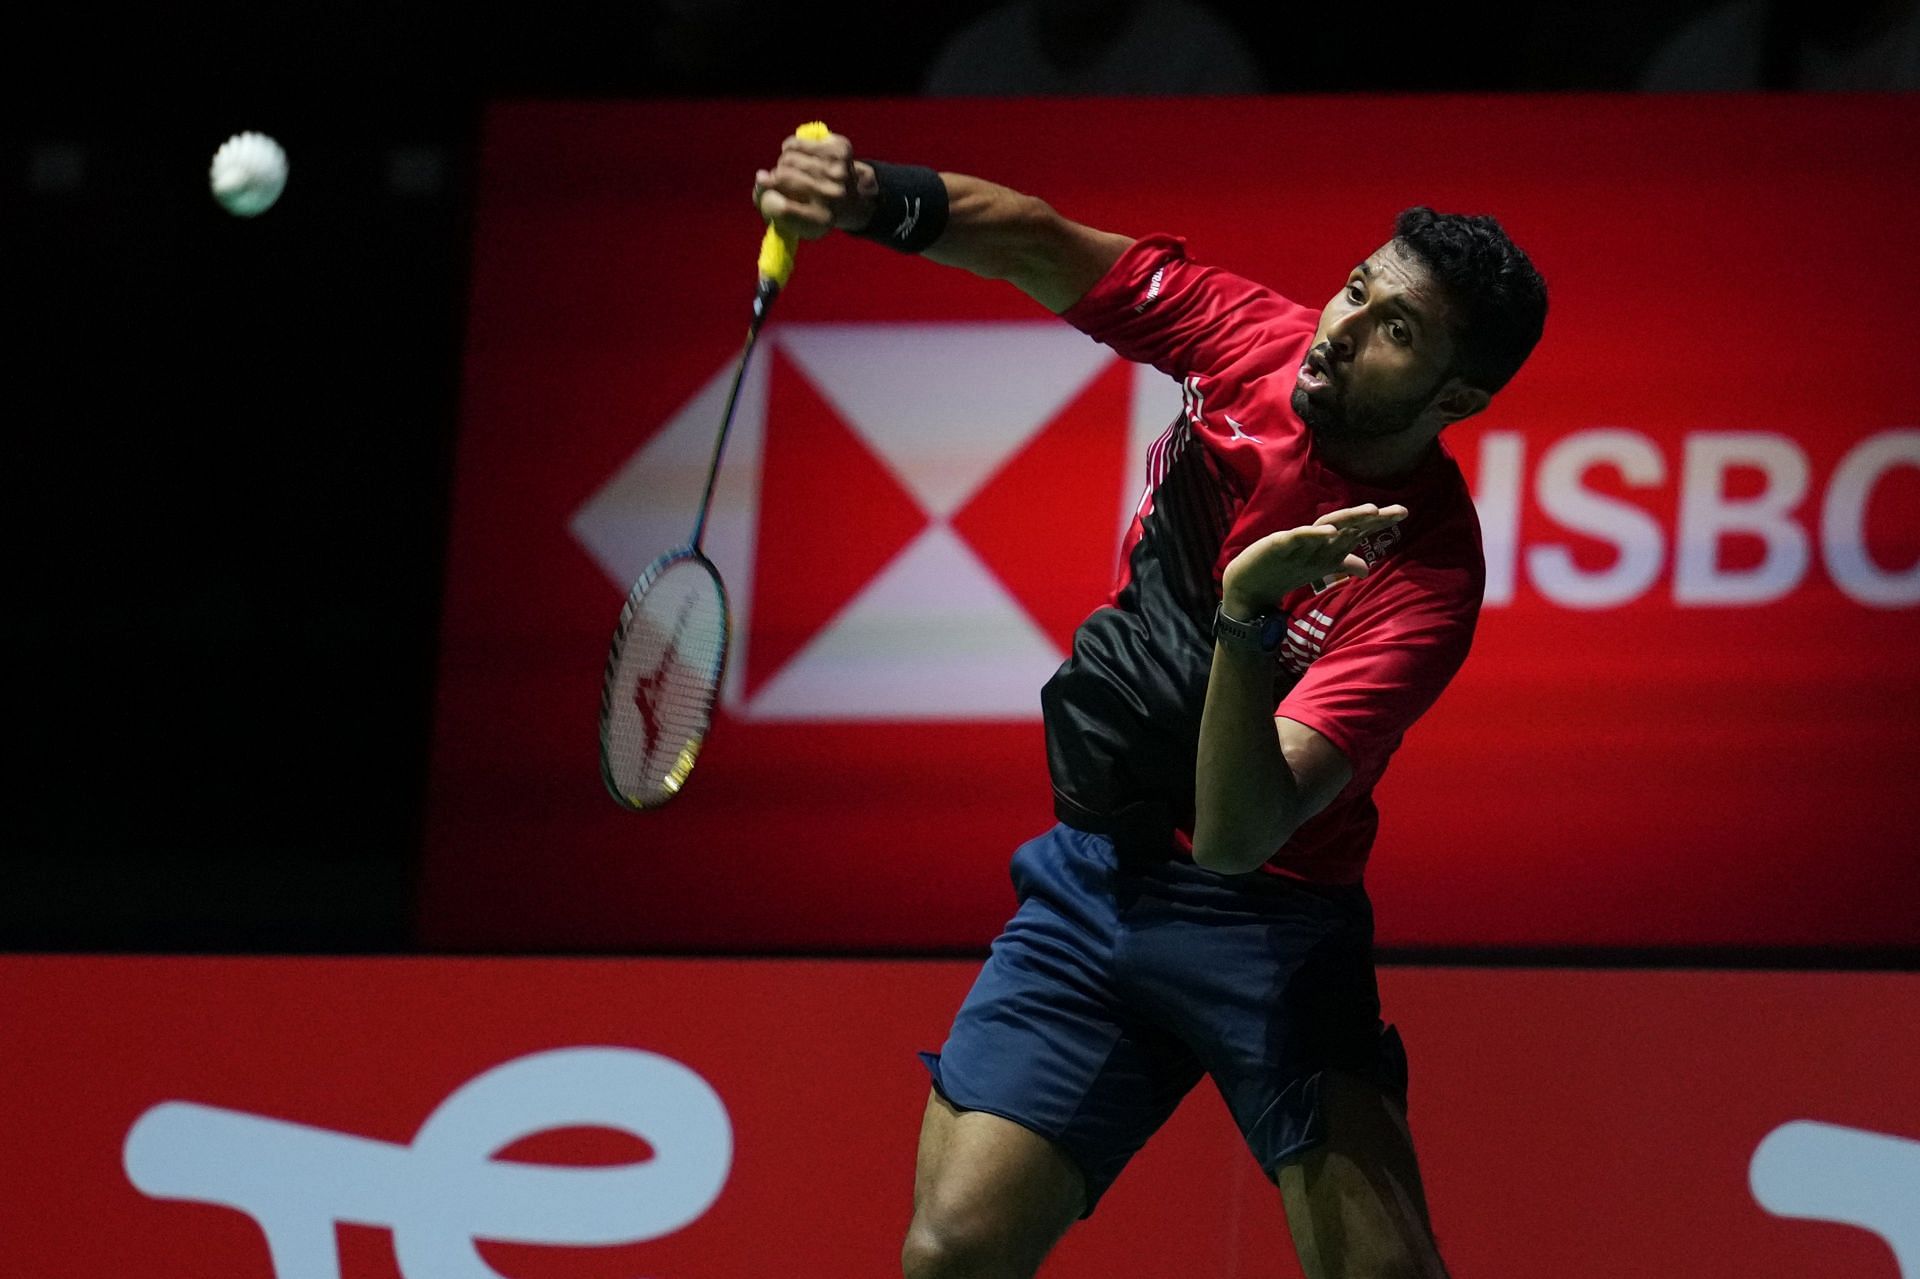 Australian Open Badminton 2023 HS Prannoy vs Lee Cheuk Yiu, head-to-head, prediction, where to watch and live streaming details